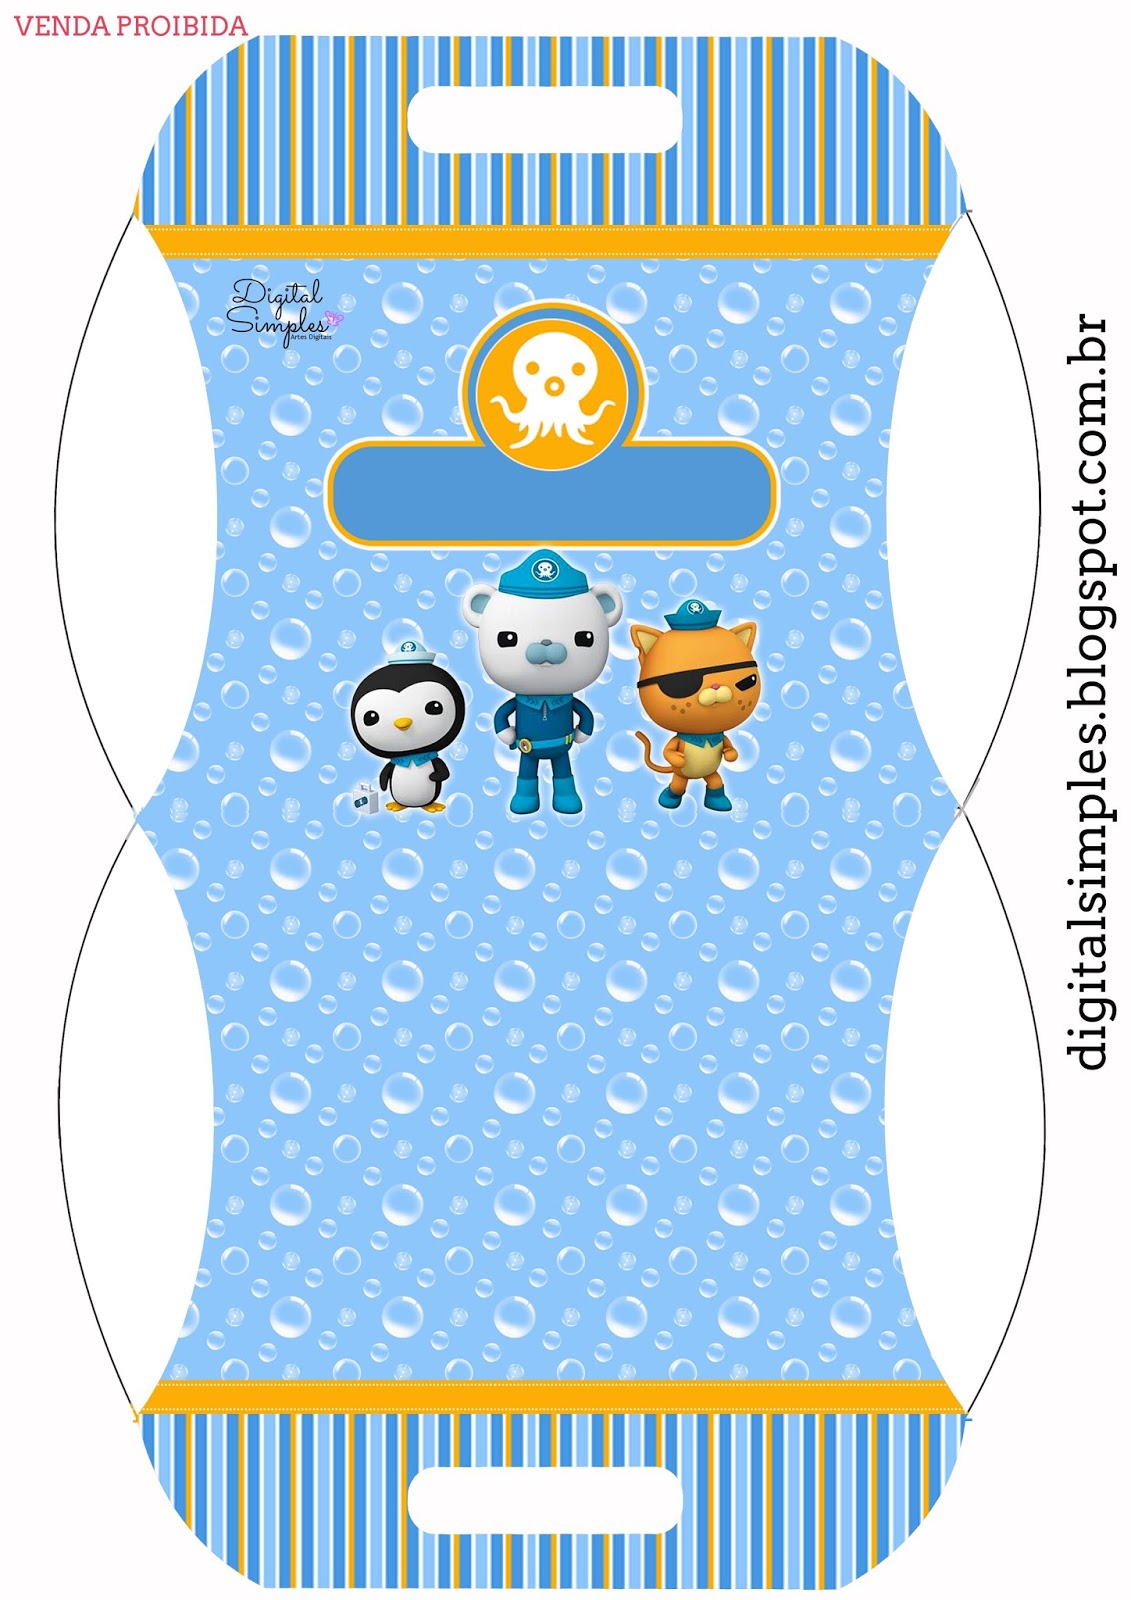 octonauts-free-printable-boxes-oh-my-fiesta-in-english